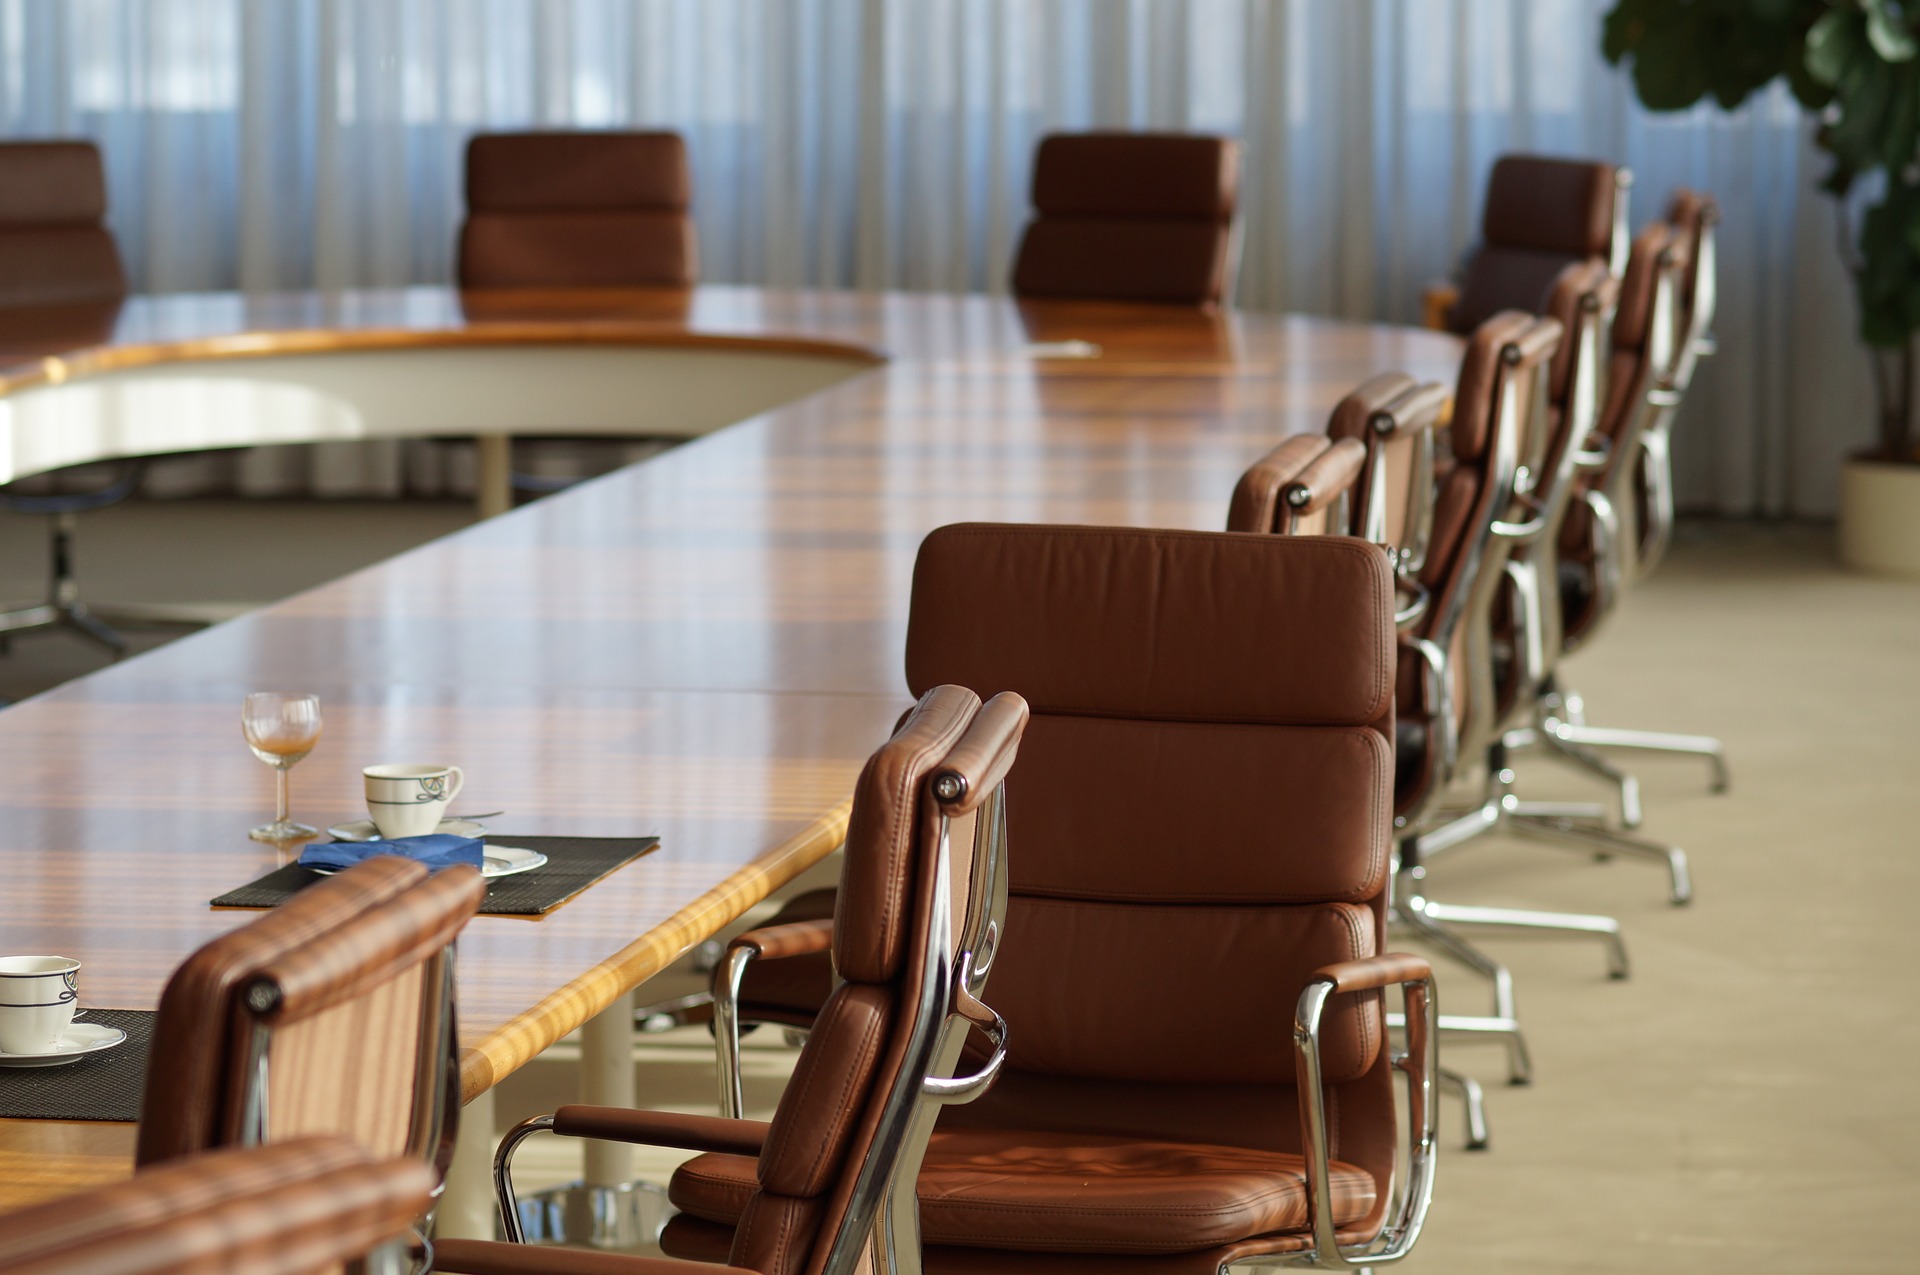 Board room style table with chairs around it, one turned toward the camera